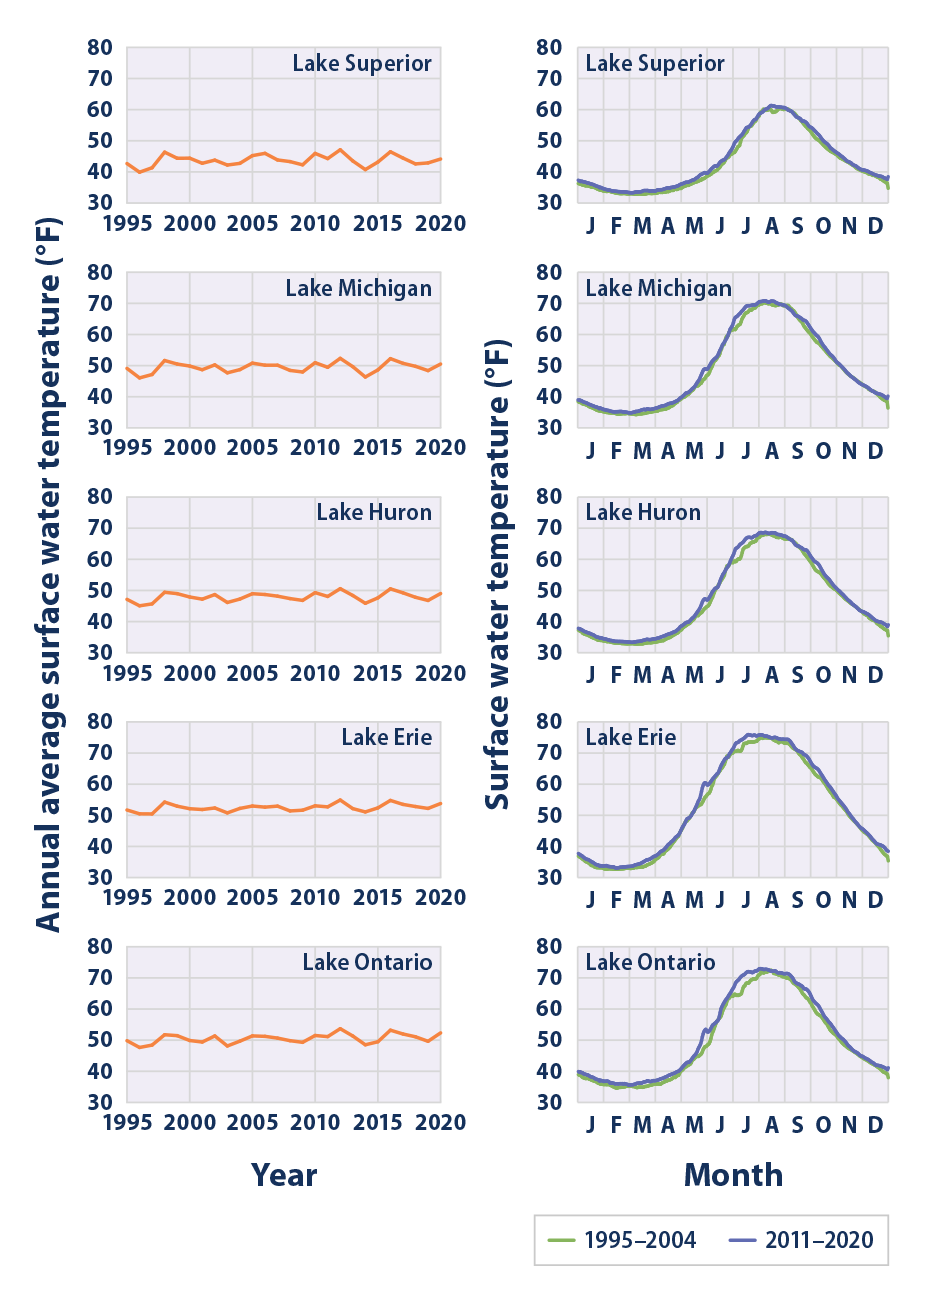  Line graphs showing water temperatures in each of the Great Lakes from 1995 to 2020.